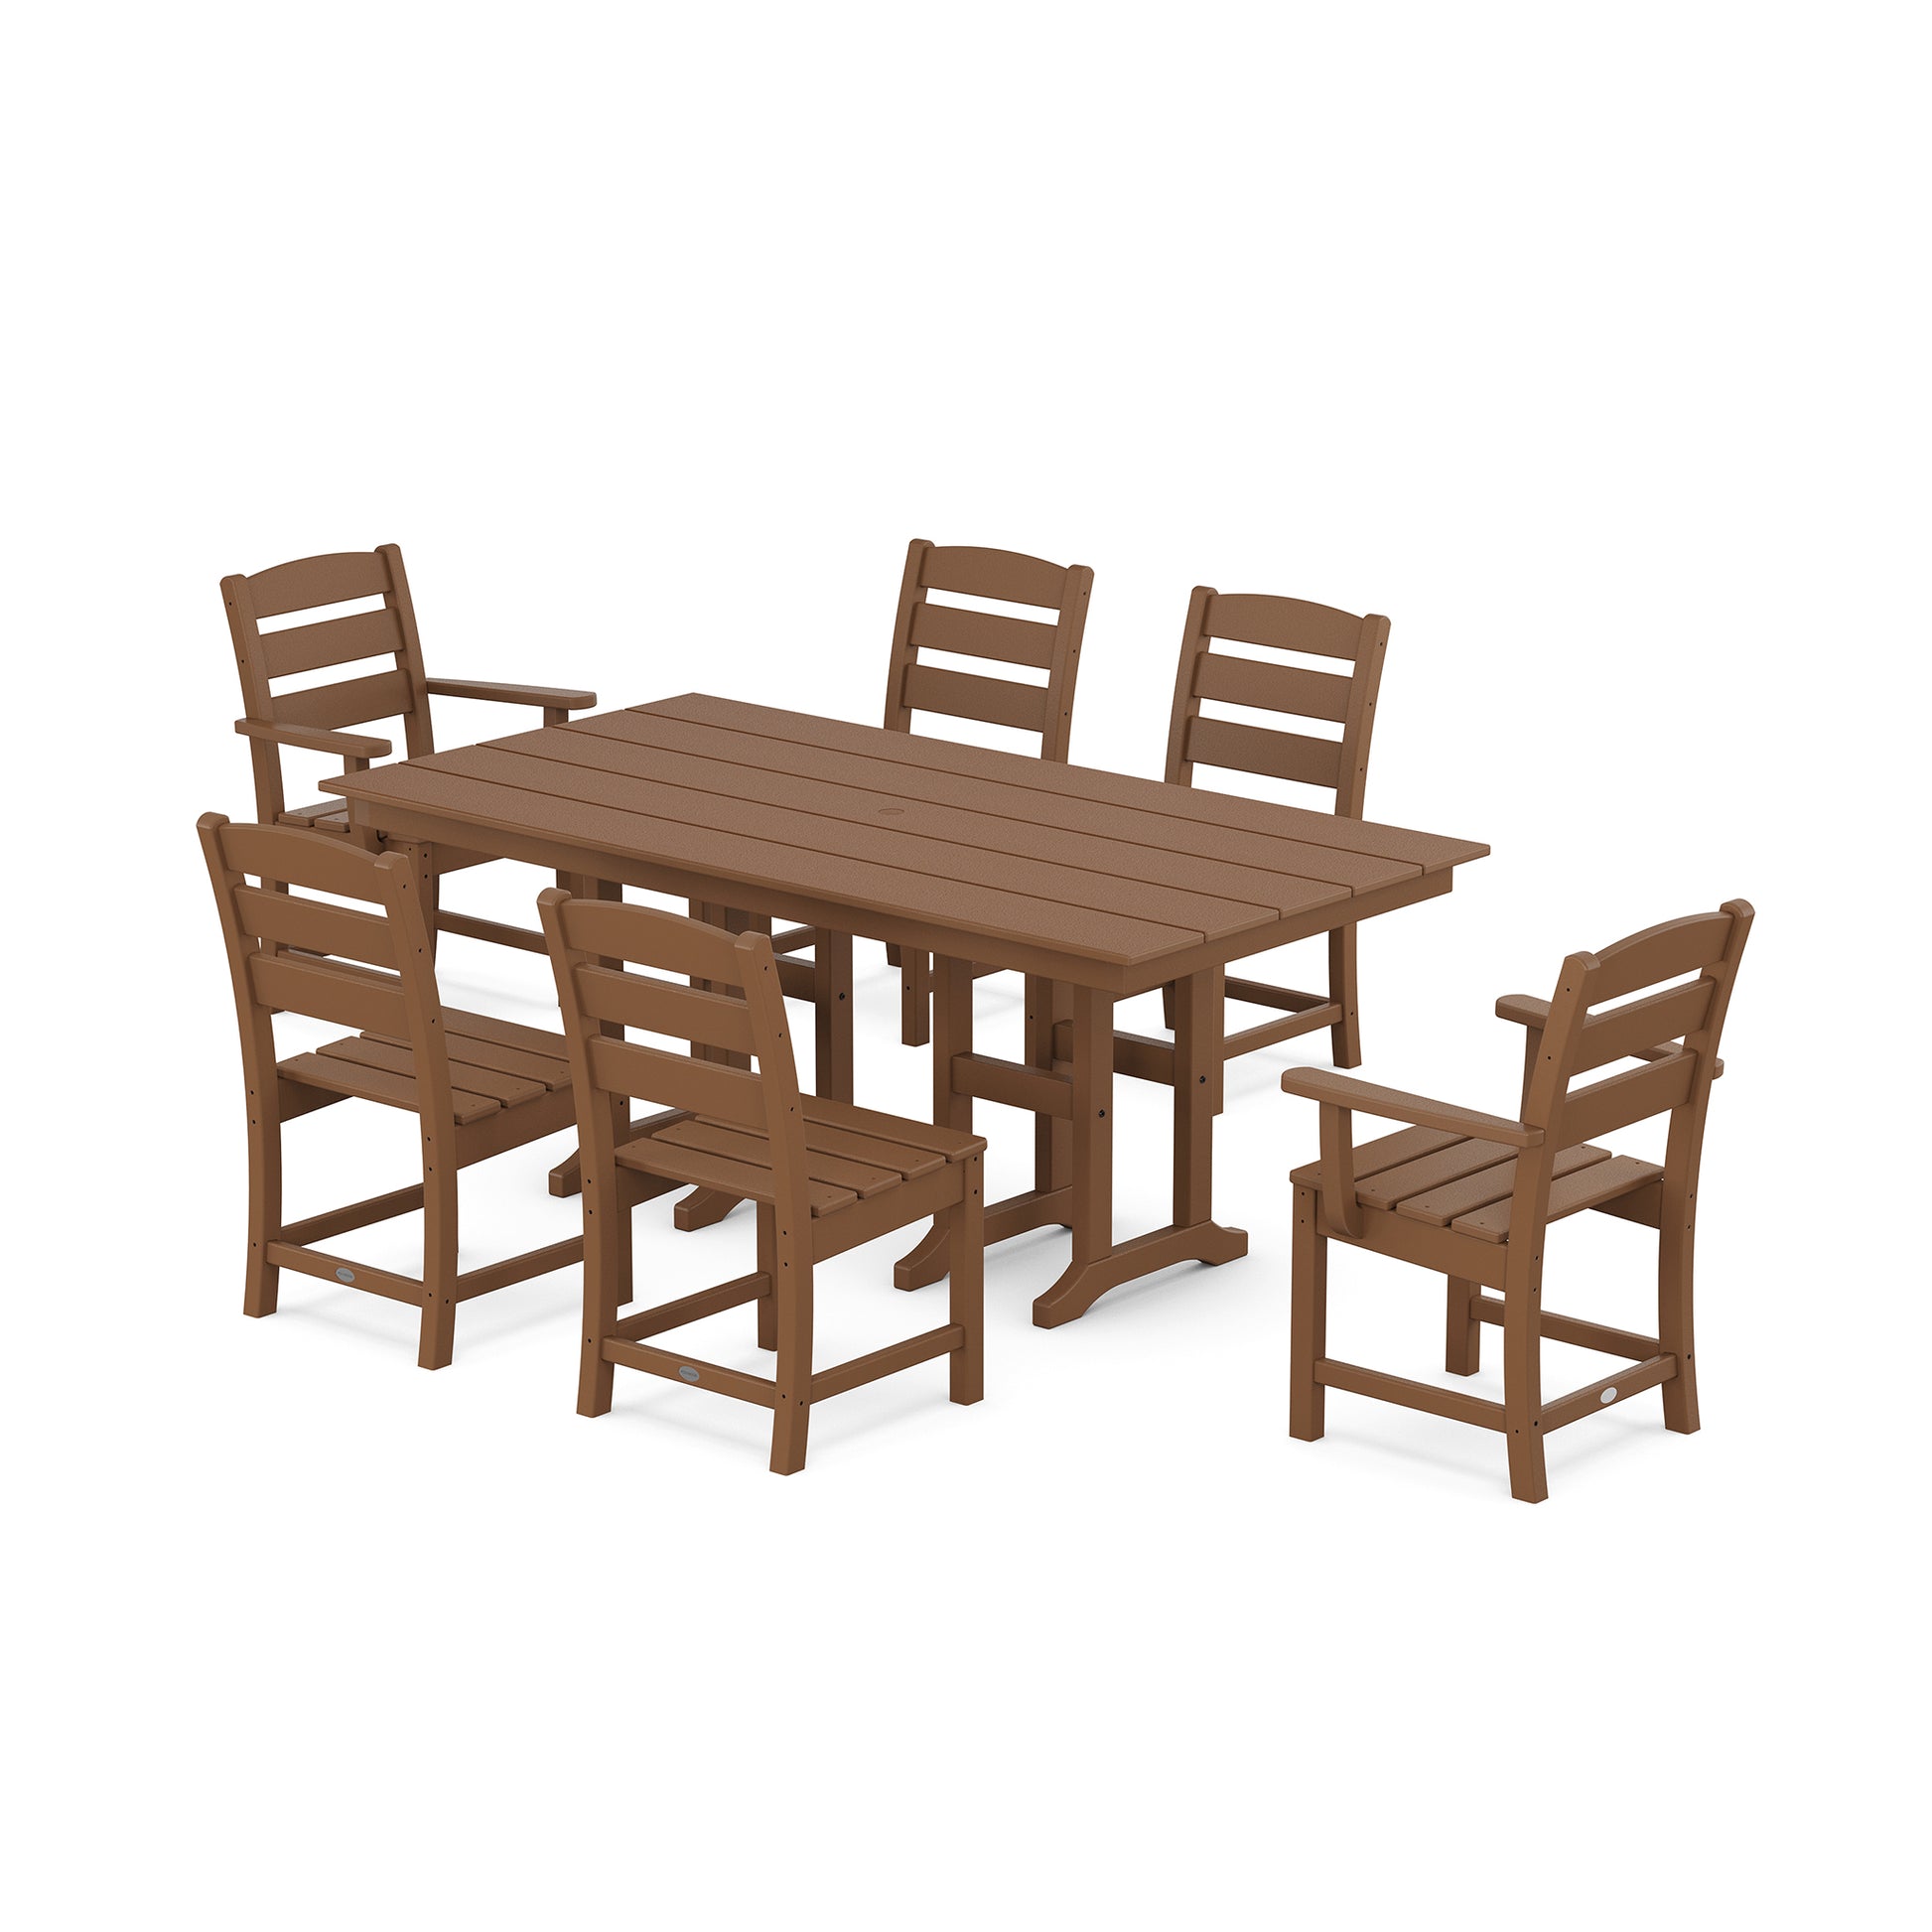 A brown weather-resistant POLYWOOD Lakeside 7-Piece Farmhouse Dining Set consisting of a rectangular table and six matching chairs on a plain white background.